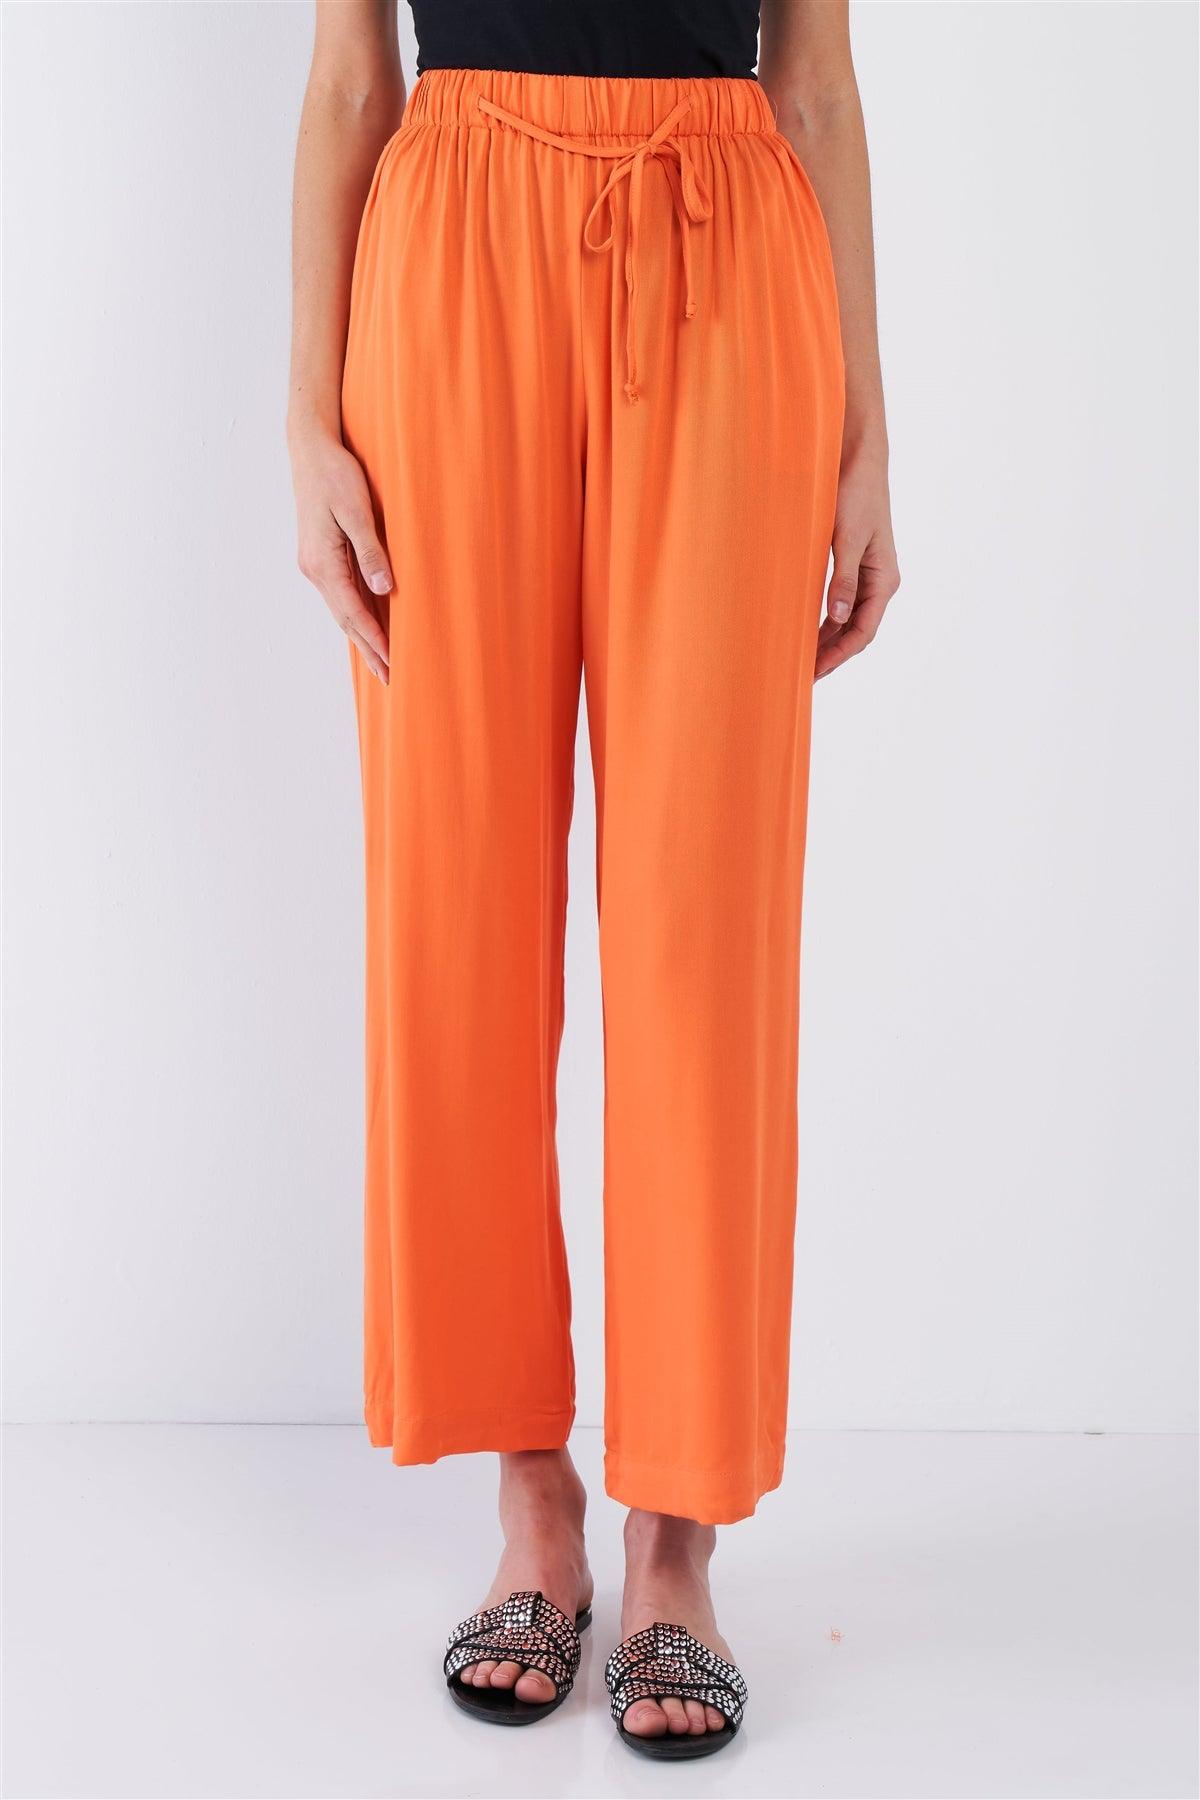 Orange Cotton Relaxed Fit Casual Wide Leg Ankle Pant   /3-2-1